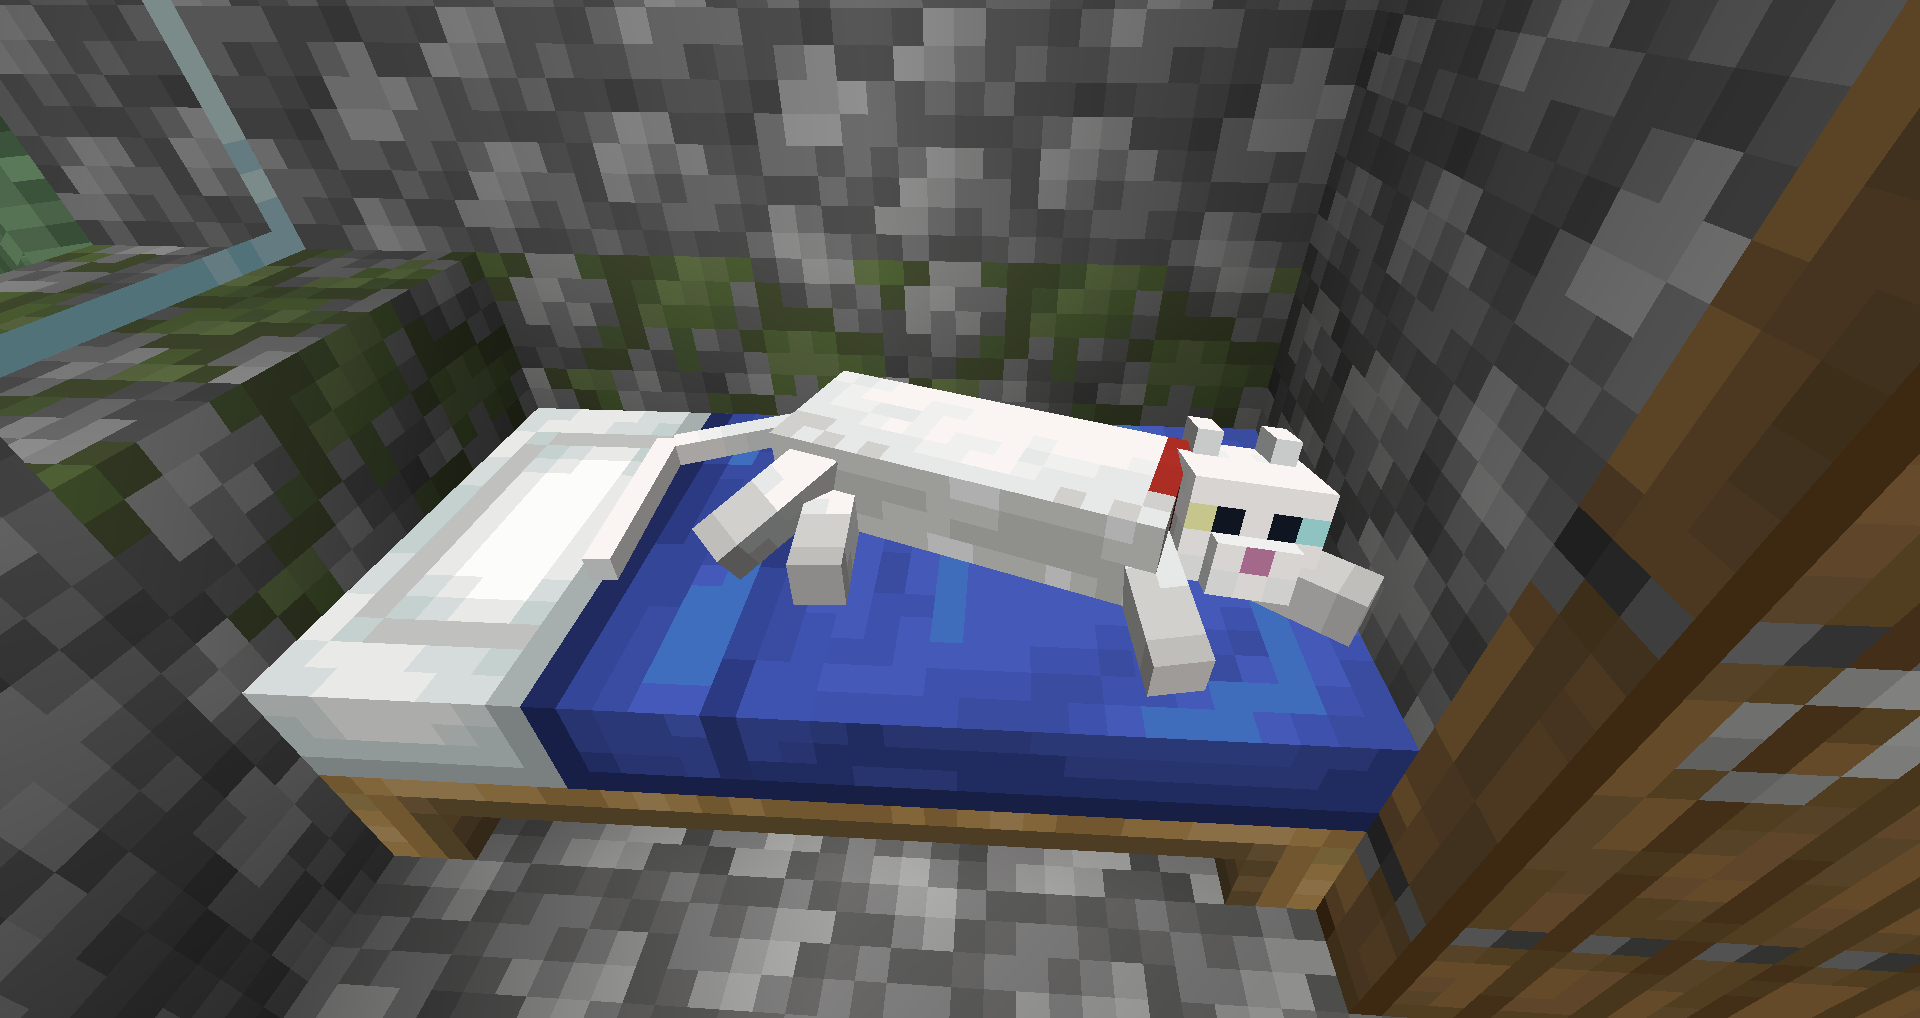 How To Make A Cat Sleep In Minecraft